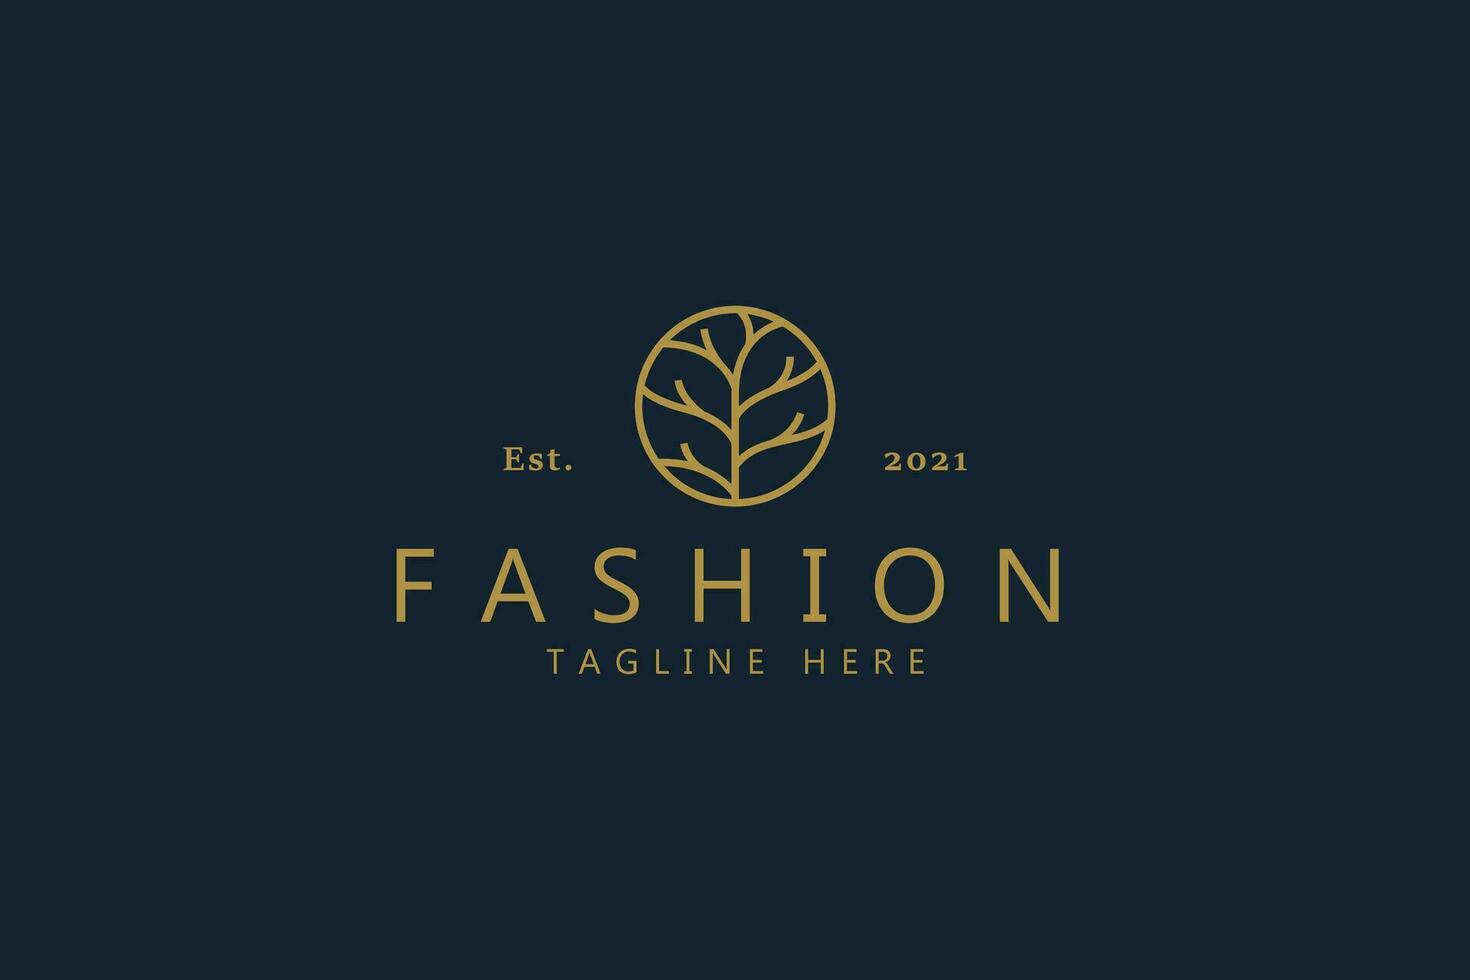 Premium Vector Abstract Branch Logo for Woman Symbol Business Company Like Fashion, Spa, Cosmetic, Beauty, Garden, Jewelry, Organic, Wedding, etc.